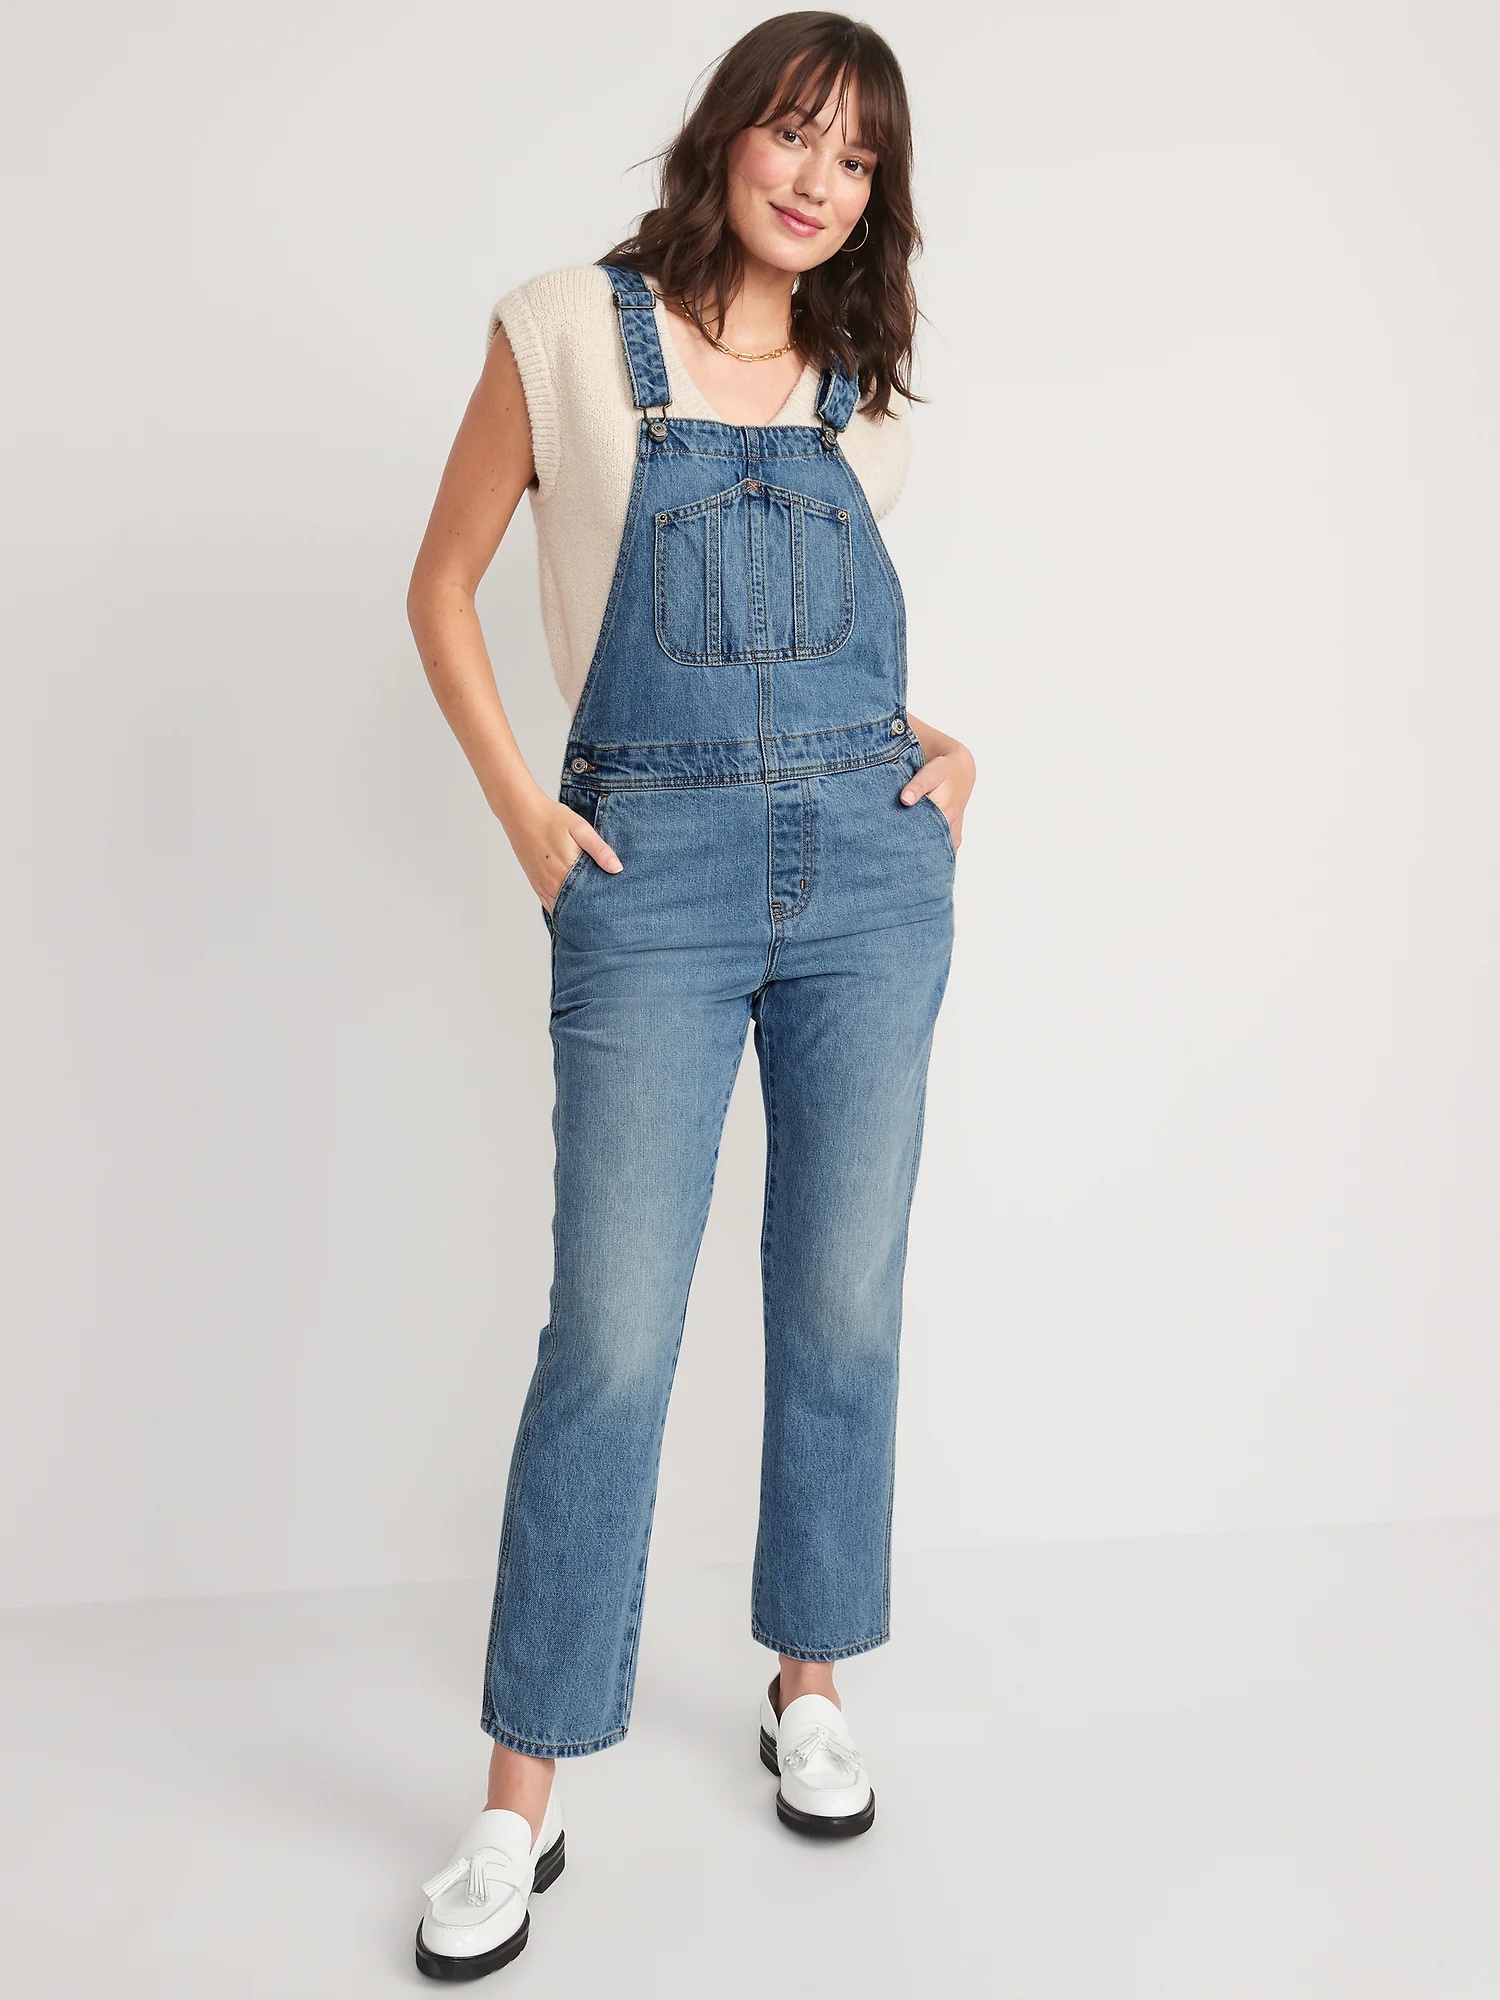 Best Women's Overalls for Every Situation - Outside Online